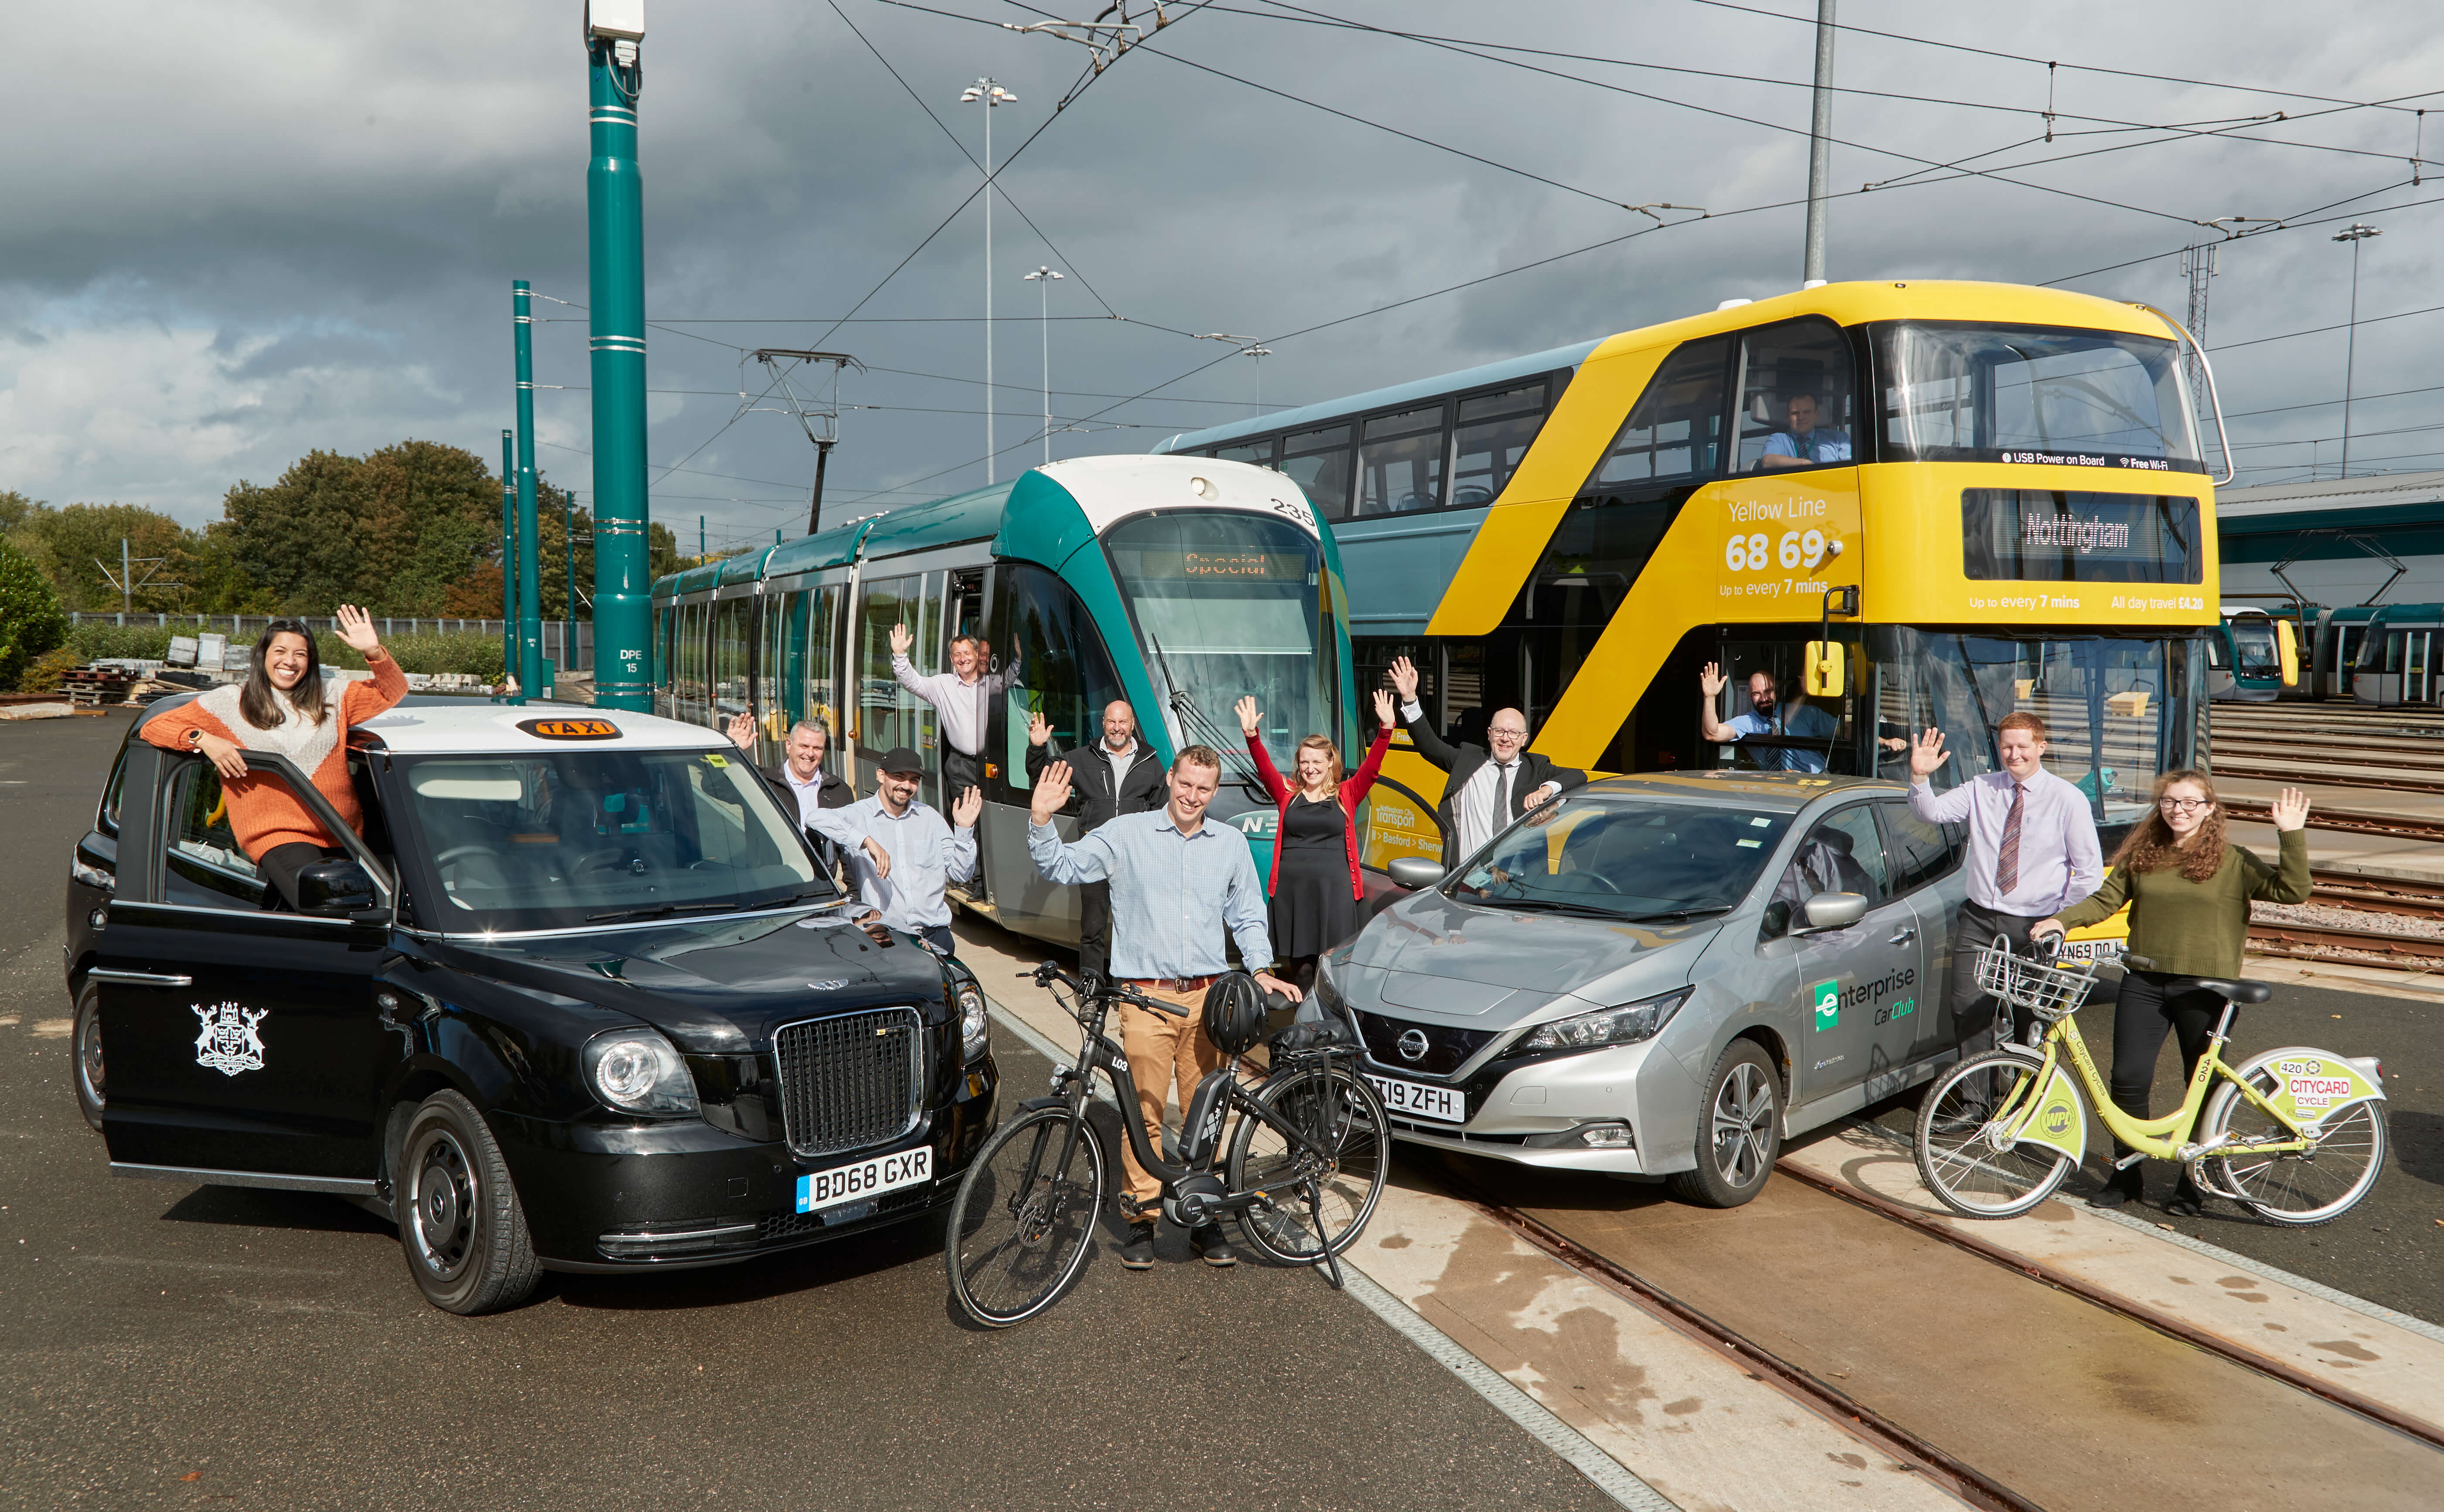 Image showing transport options in Nottingham, tram, bus, taxi, cycles, car club